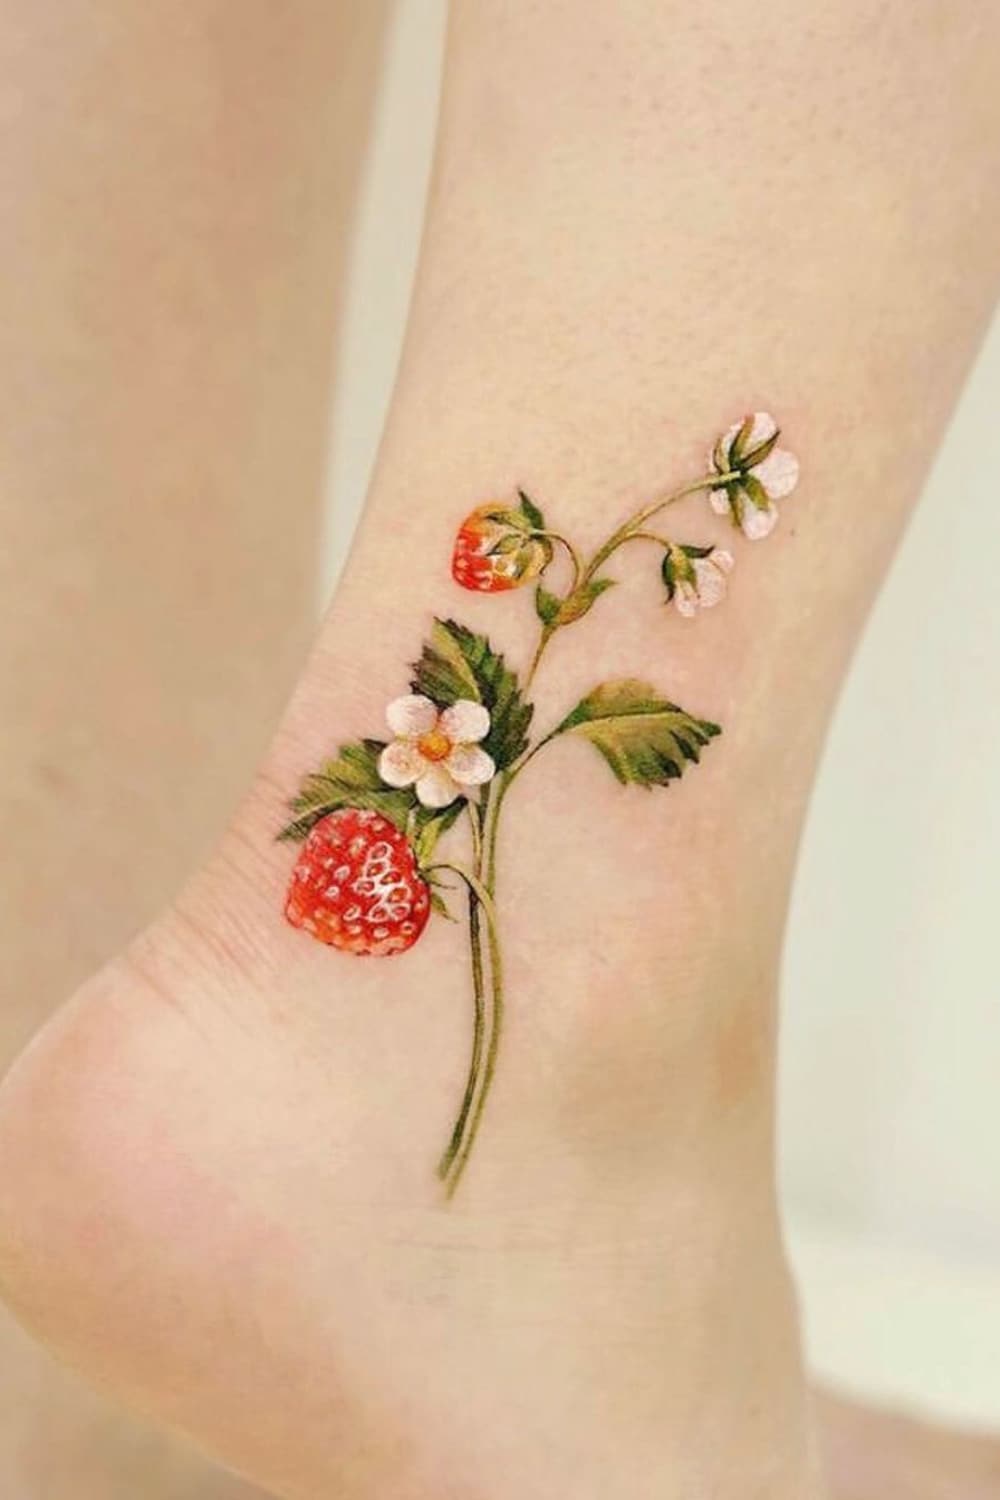 Strawberry tattoo on the ankle